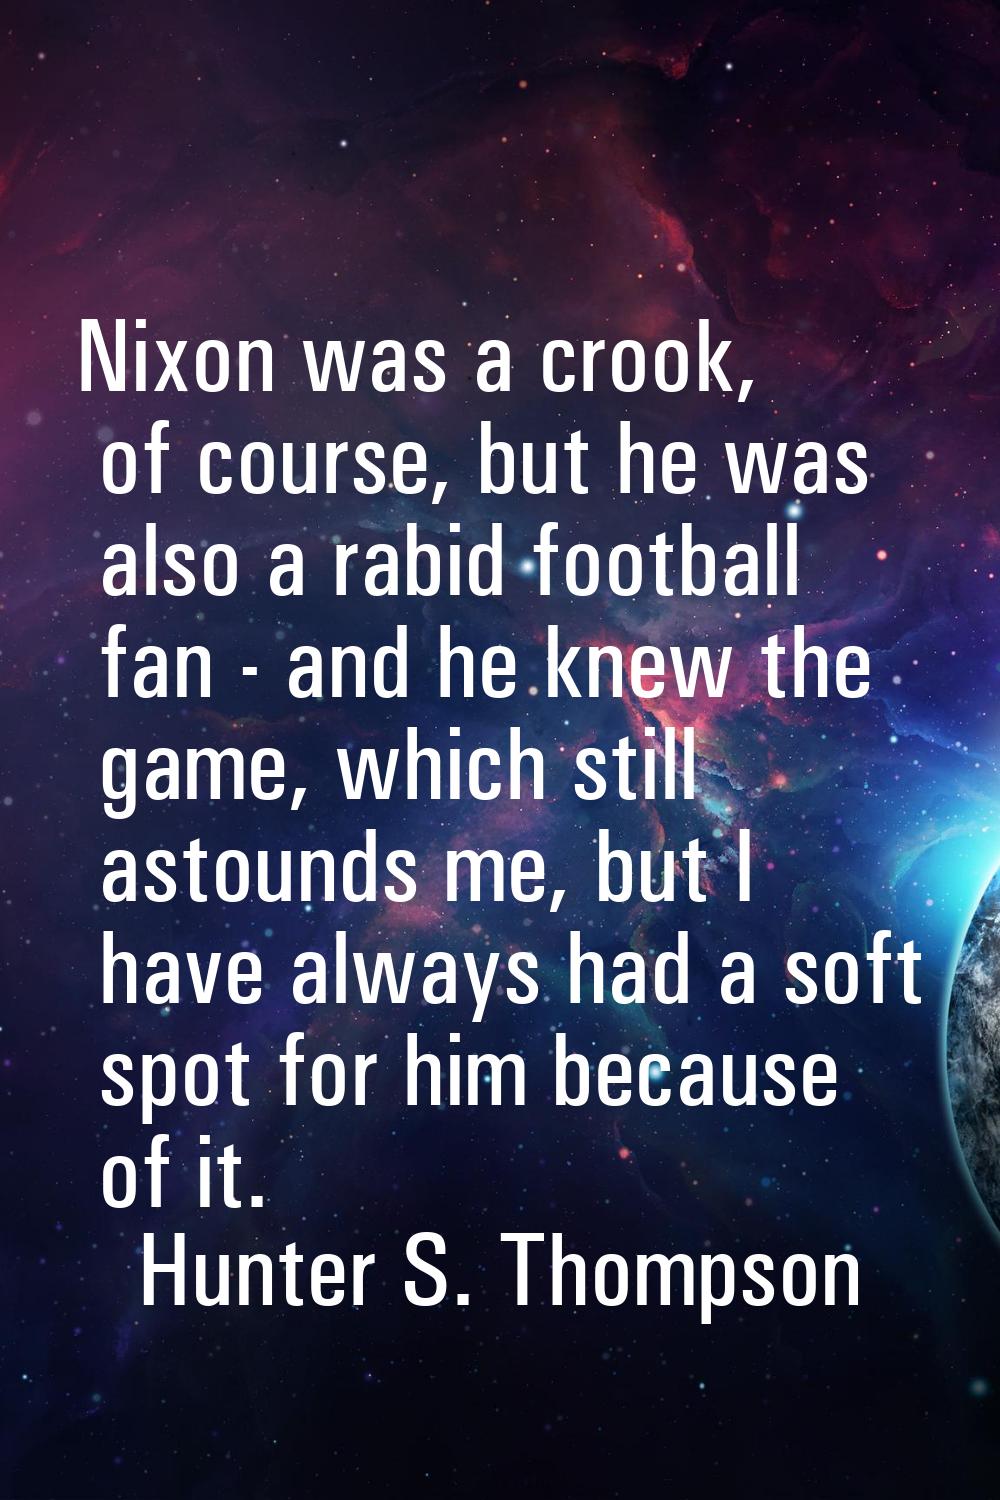 Nixon was a crook, of course, but he was also a rabid football fan - and he knew the game, which st